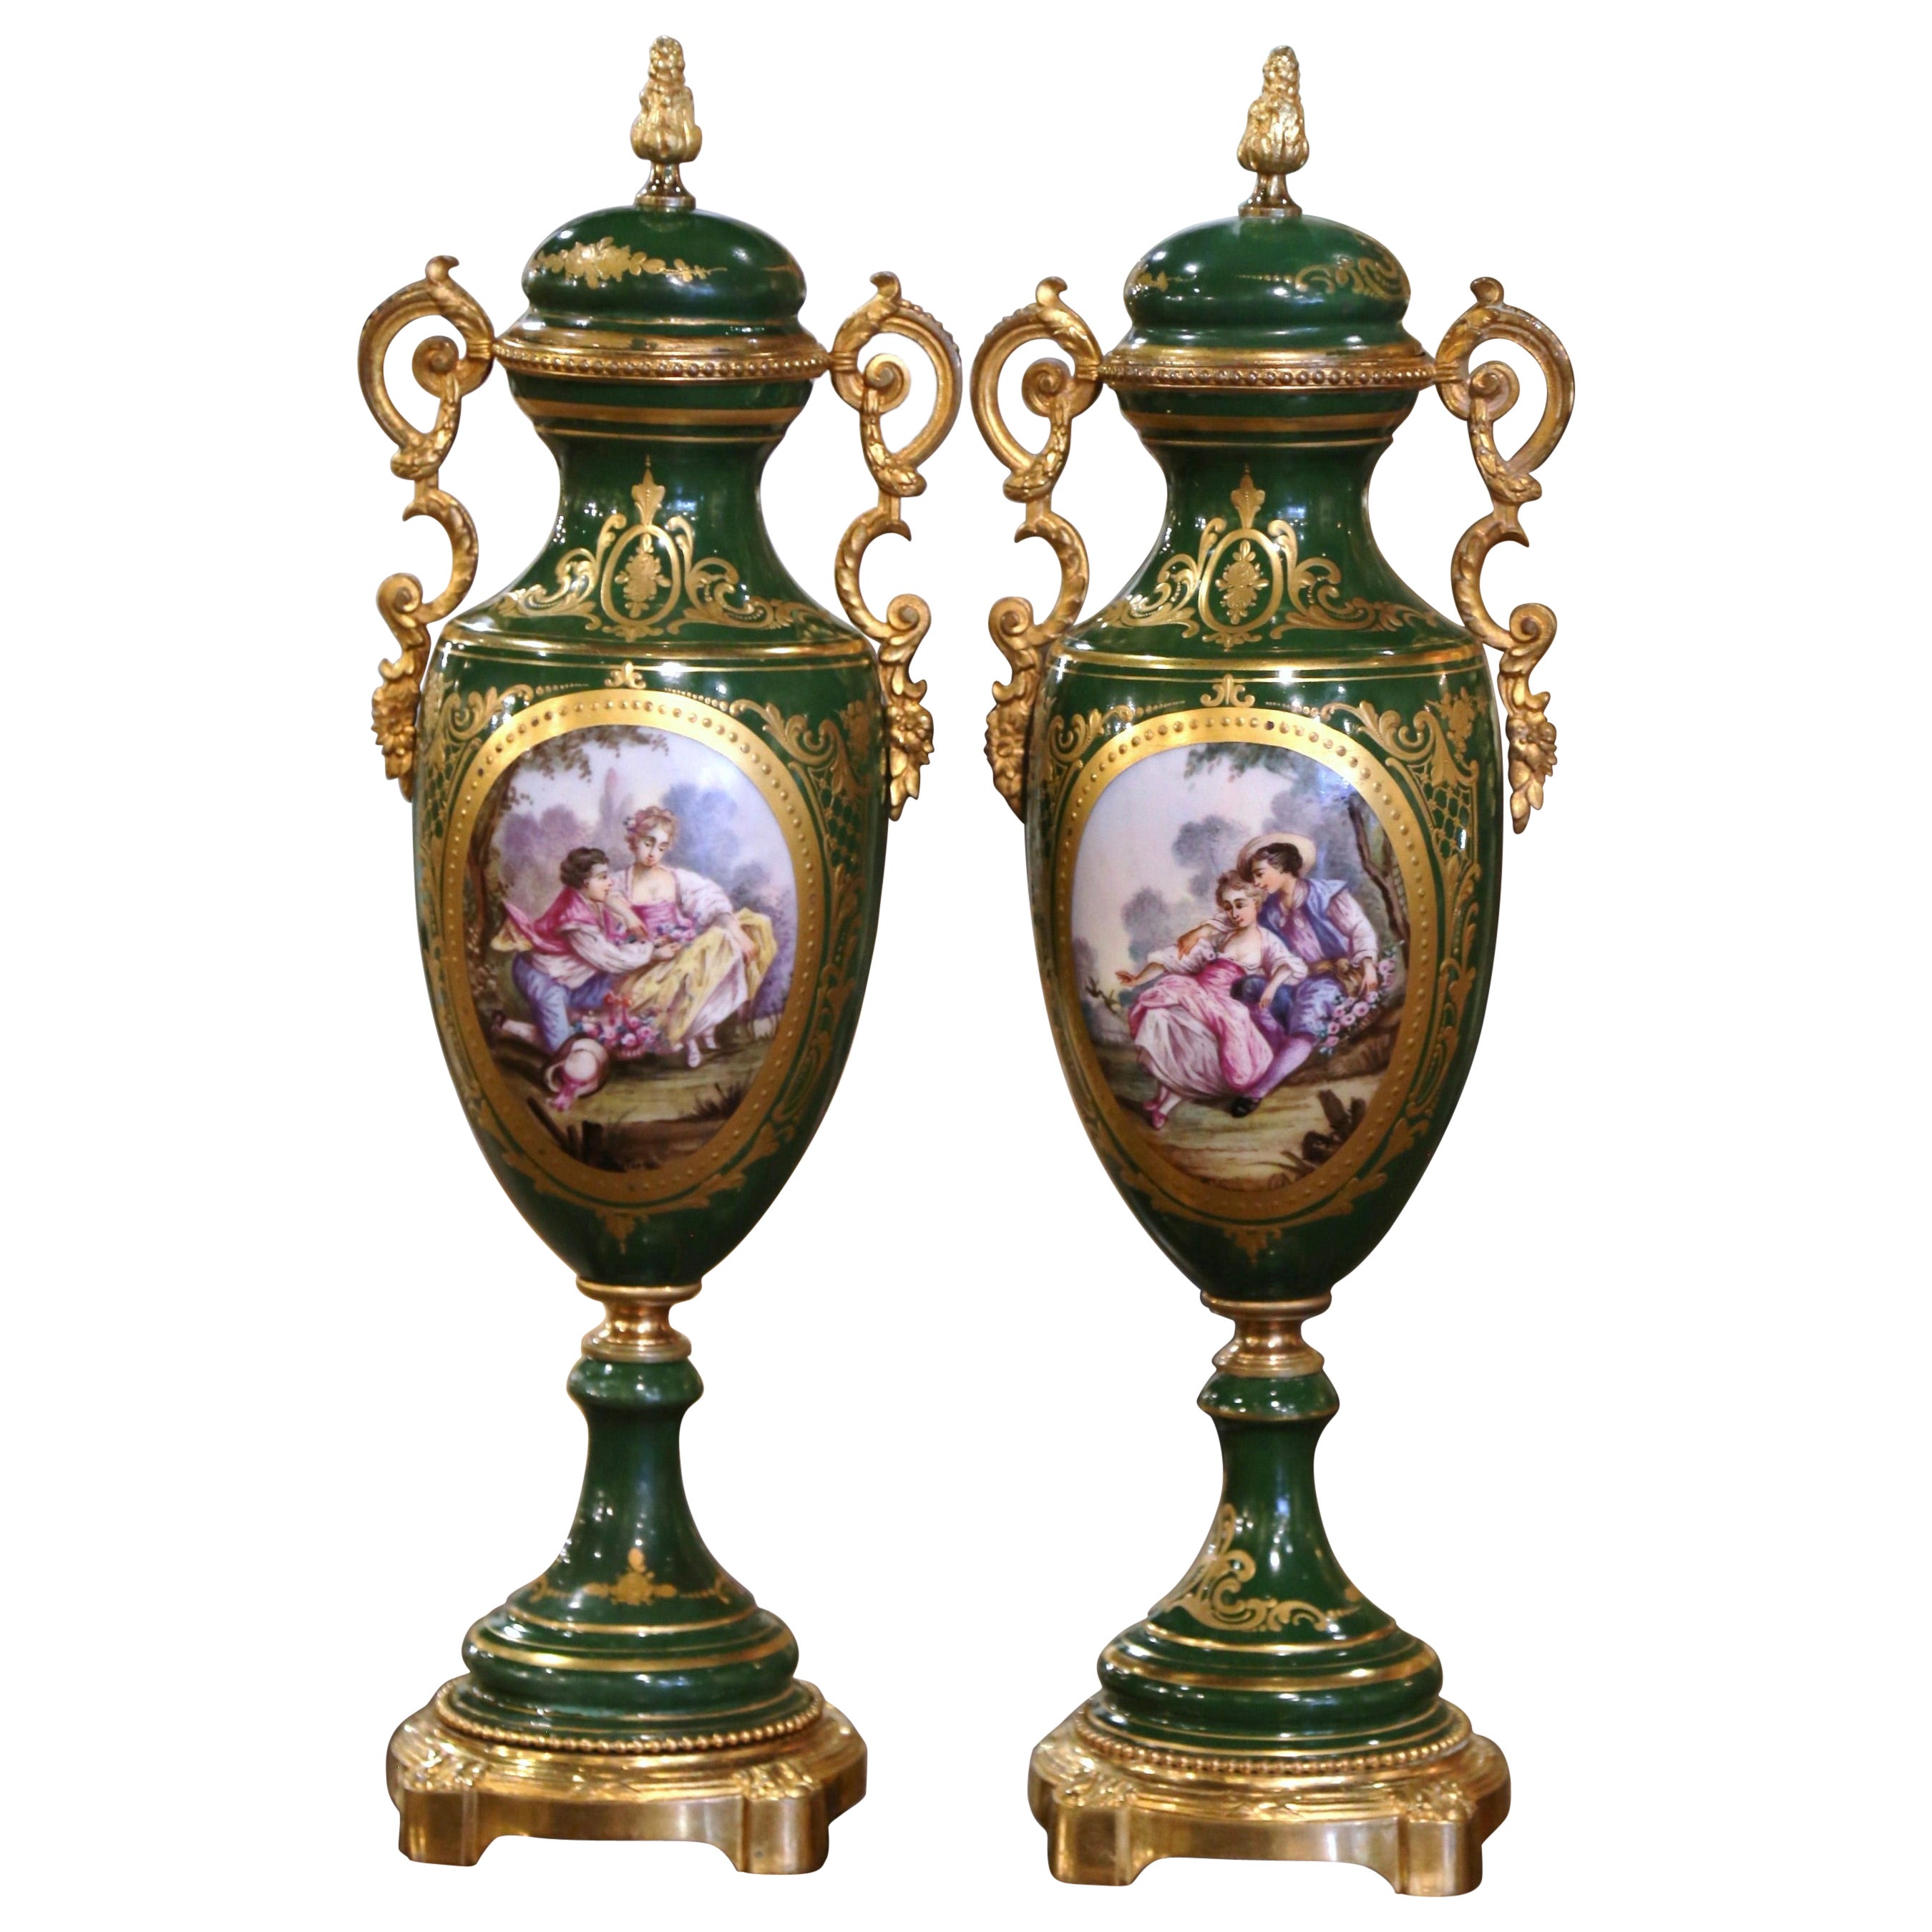 Pair of 19th Century French Sevres Gilt Metal and Painted Porcelain Covered Urns For Sale